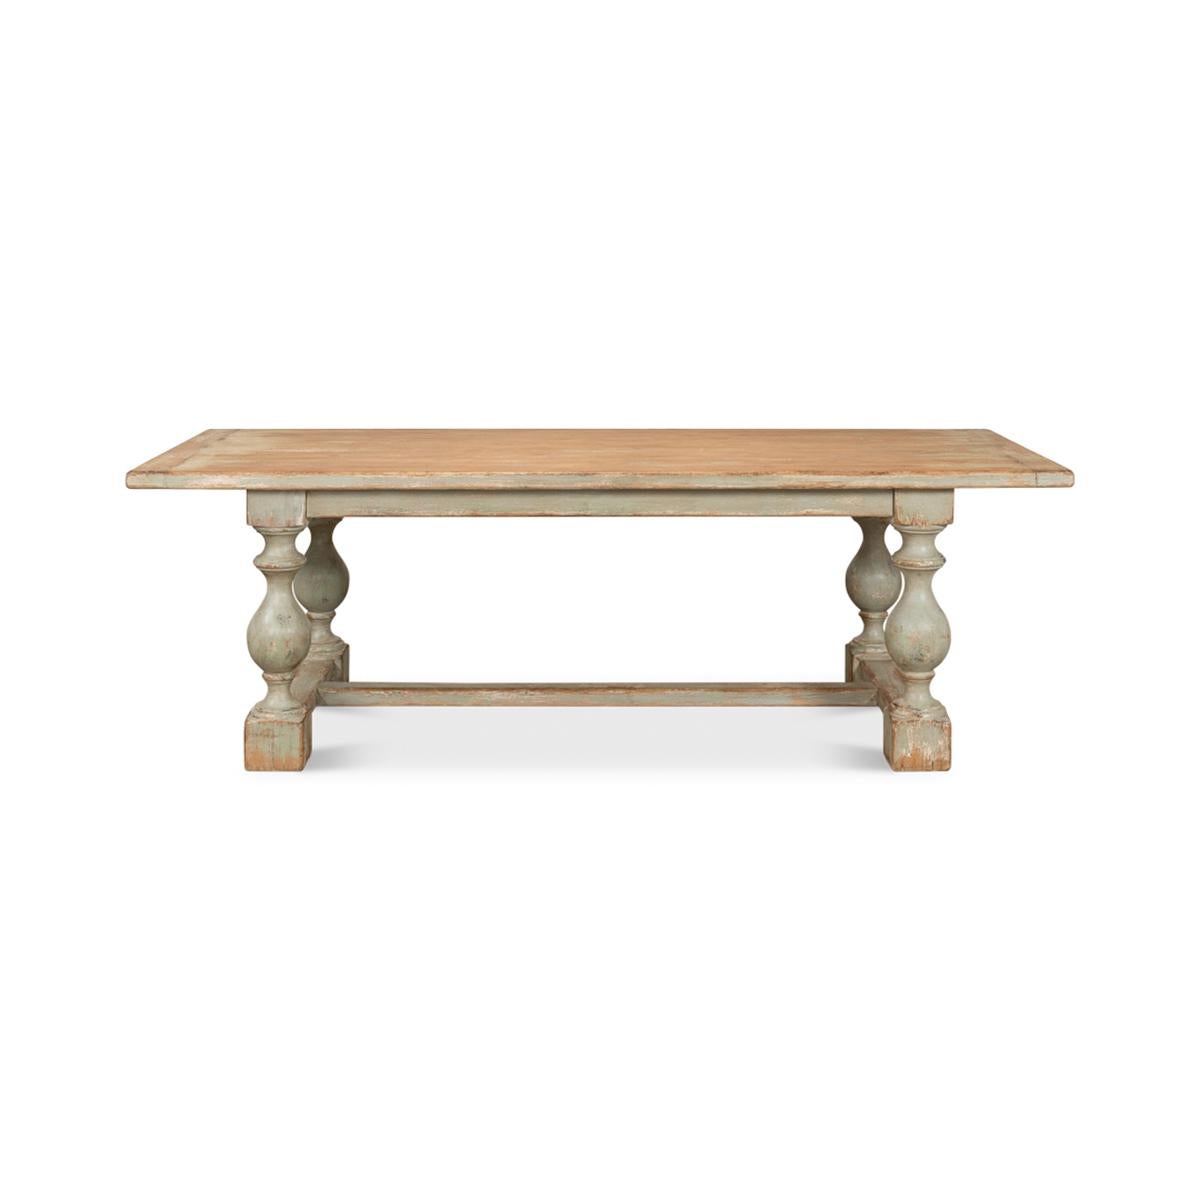 A Country style antique dining table with bold shapely turned baluster supports and an H stretcher base finished in an antiqued, distressed sage painted finish. Made of reclaimed pine with a breadboard end plank top.

Dimensions: 94